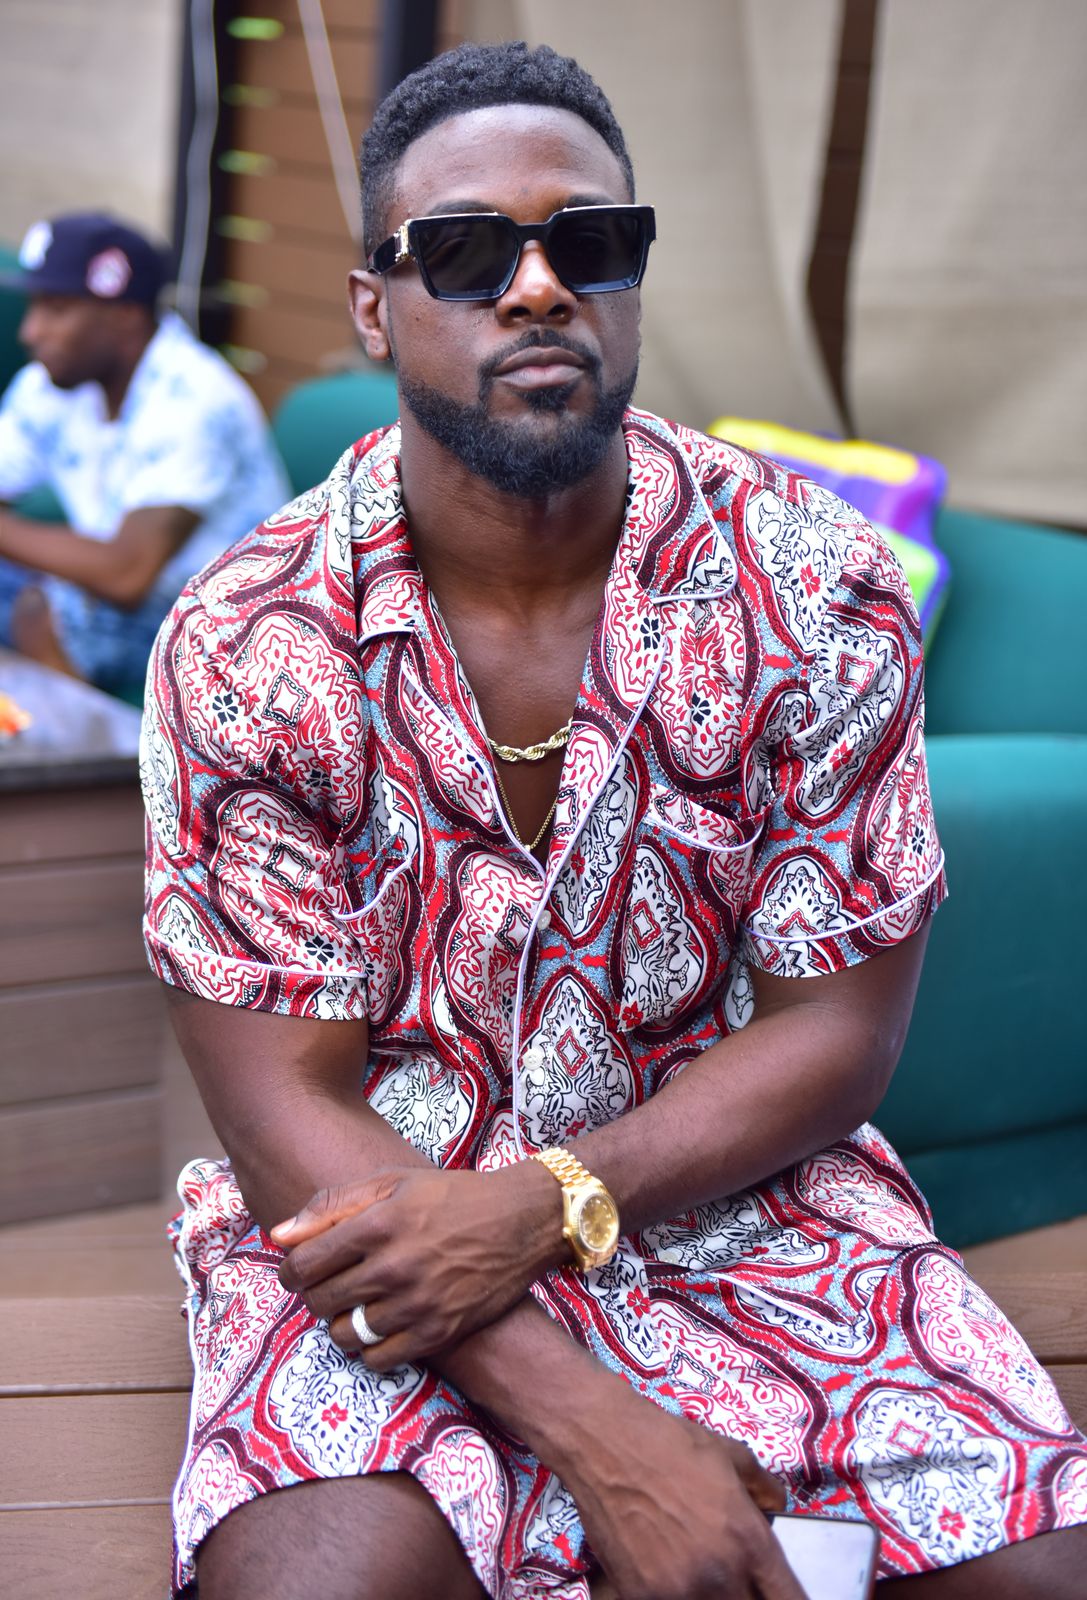 Actor Lance Gross attends the Official Luda Day Party at Elleven45 on August 31, 2019 in Atlanta, Georgia. | Photo: Getty Images